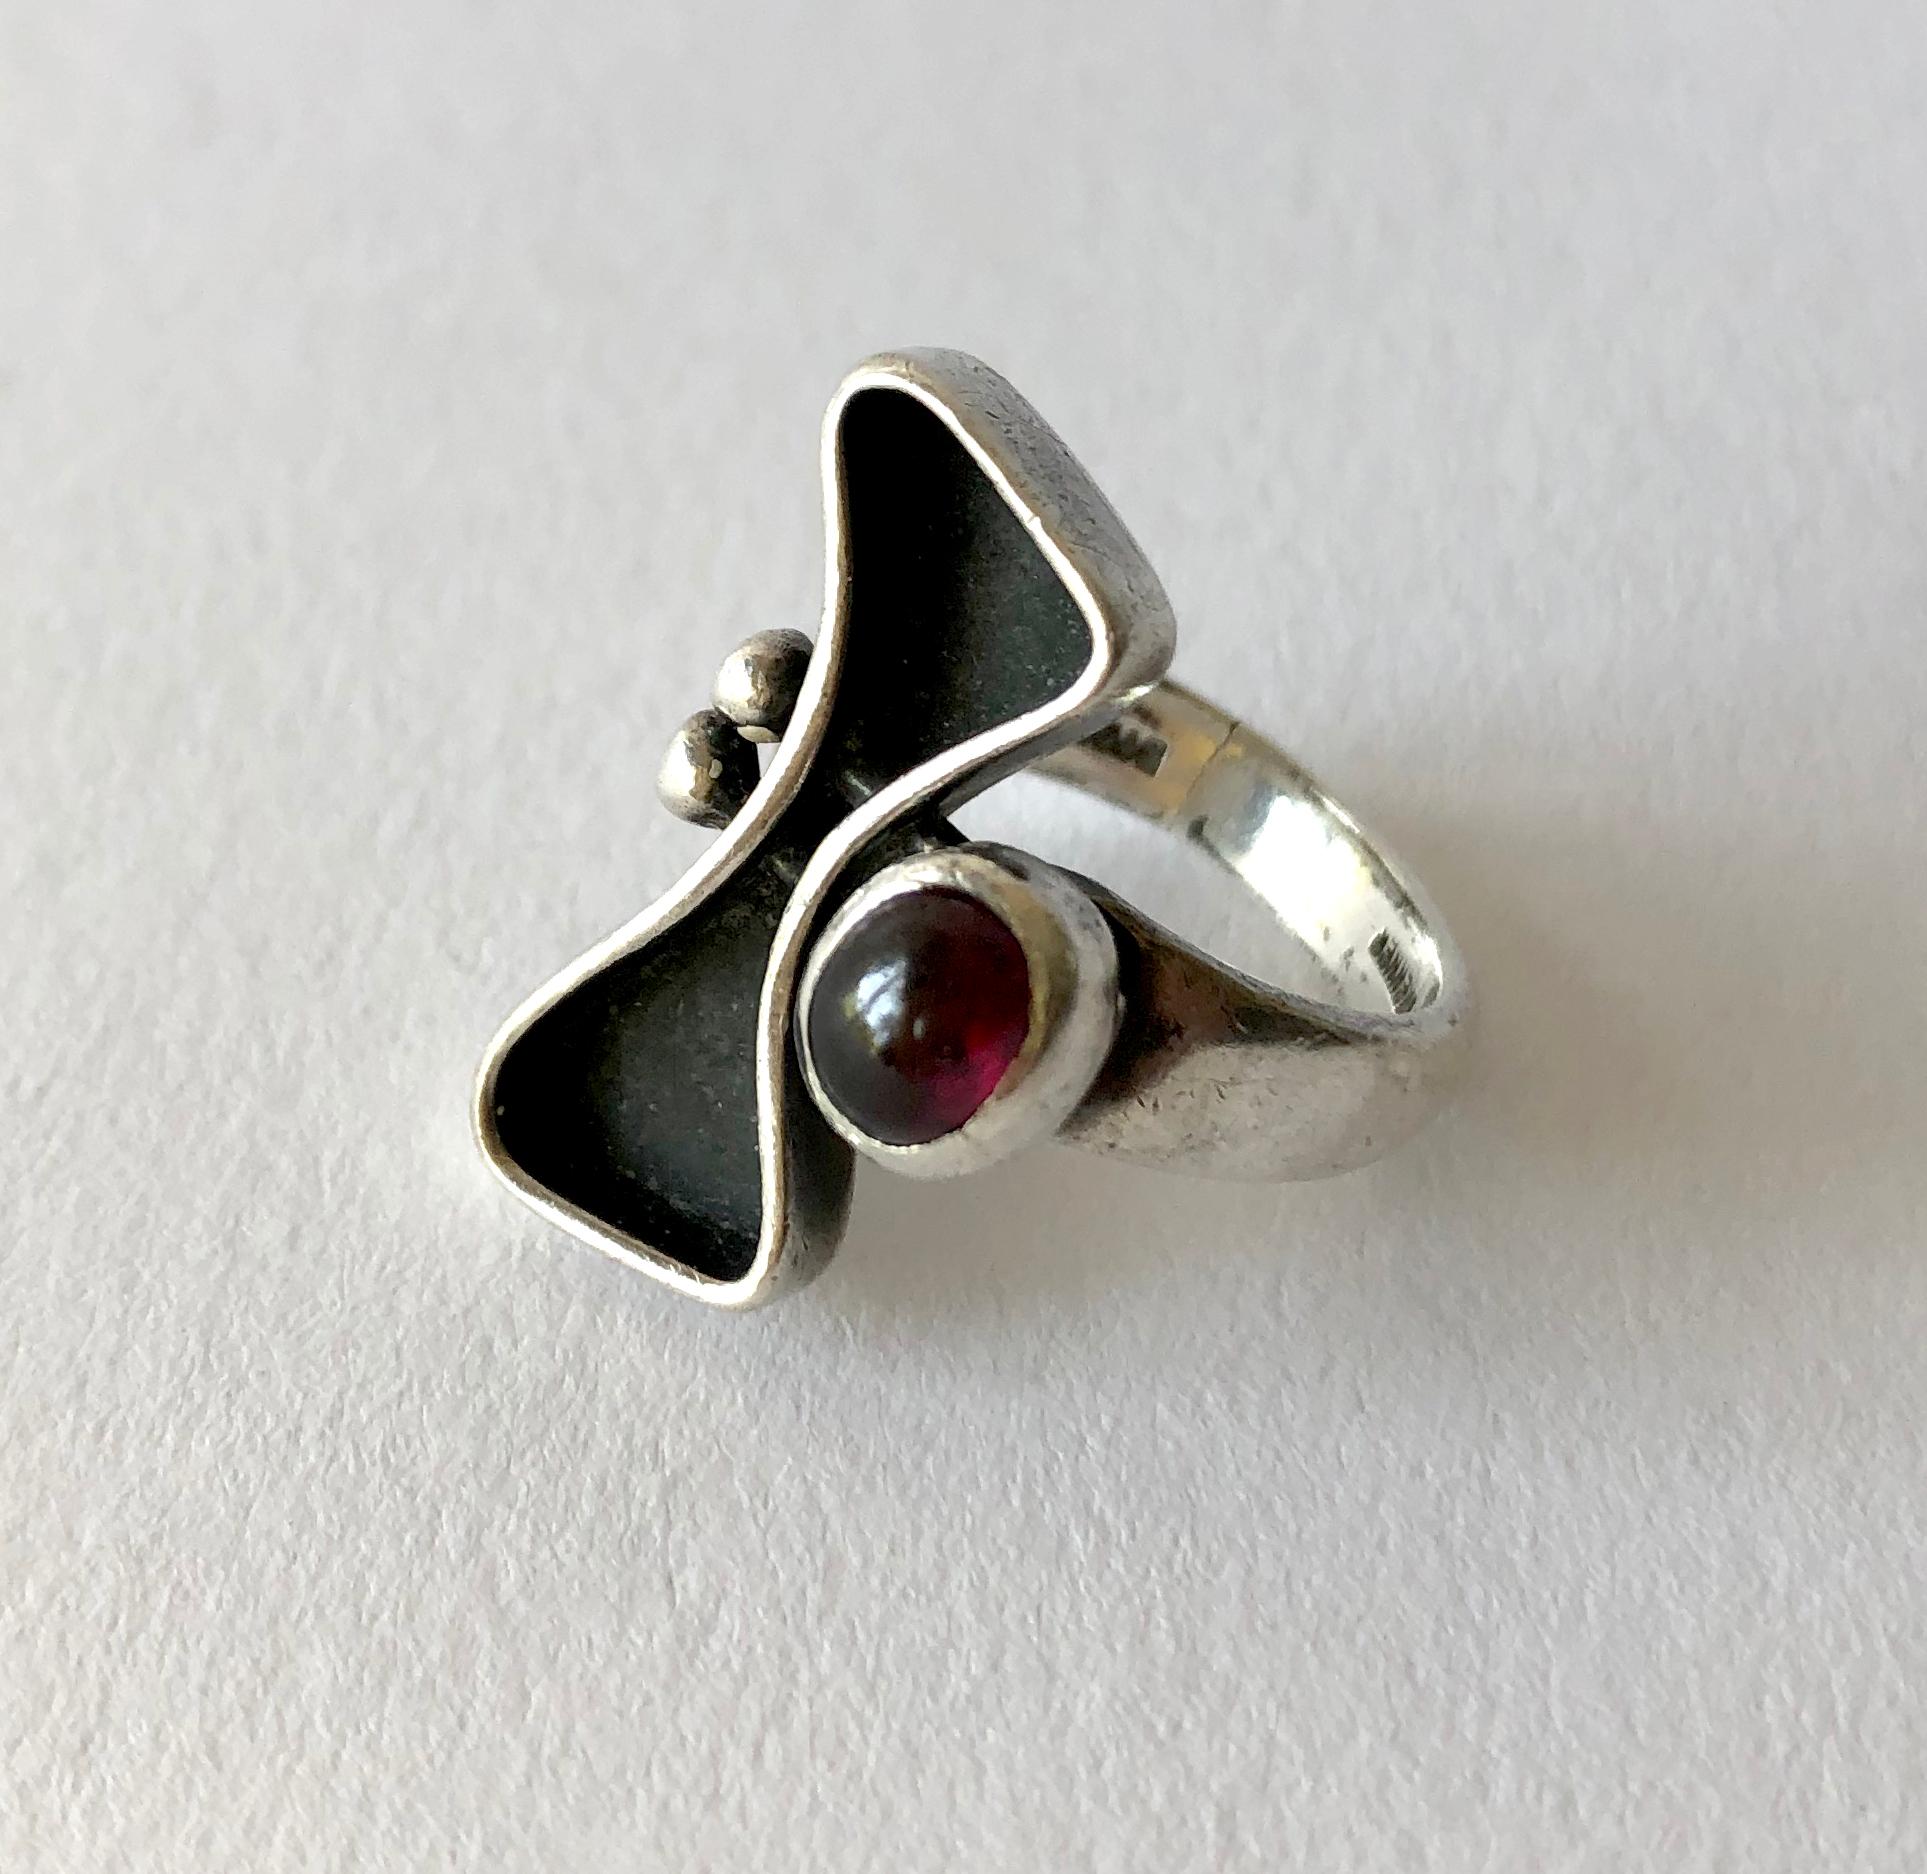 Sterling silver with garnet cabochon modernist ring, created by painter, sculptor and jeweler Jules Brenner of New York City.  Ring is a finger size 5.5 and is signed Jules Brenner on the shank.  In very good vintage condition showing signs of wear